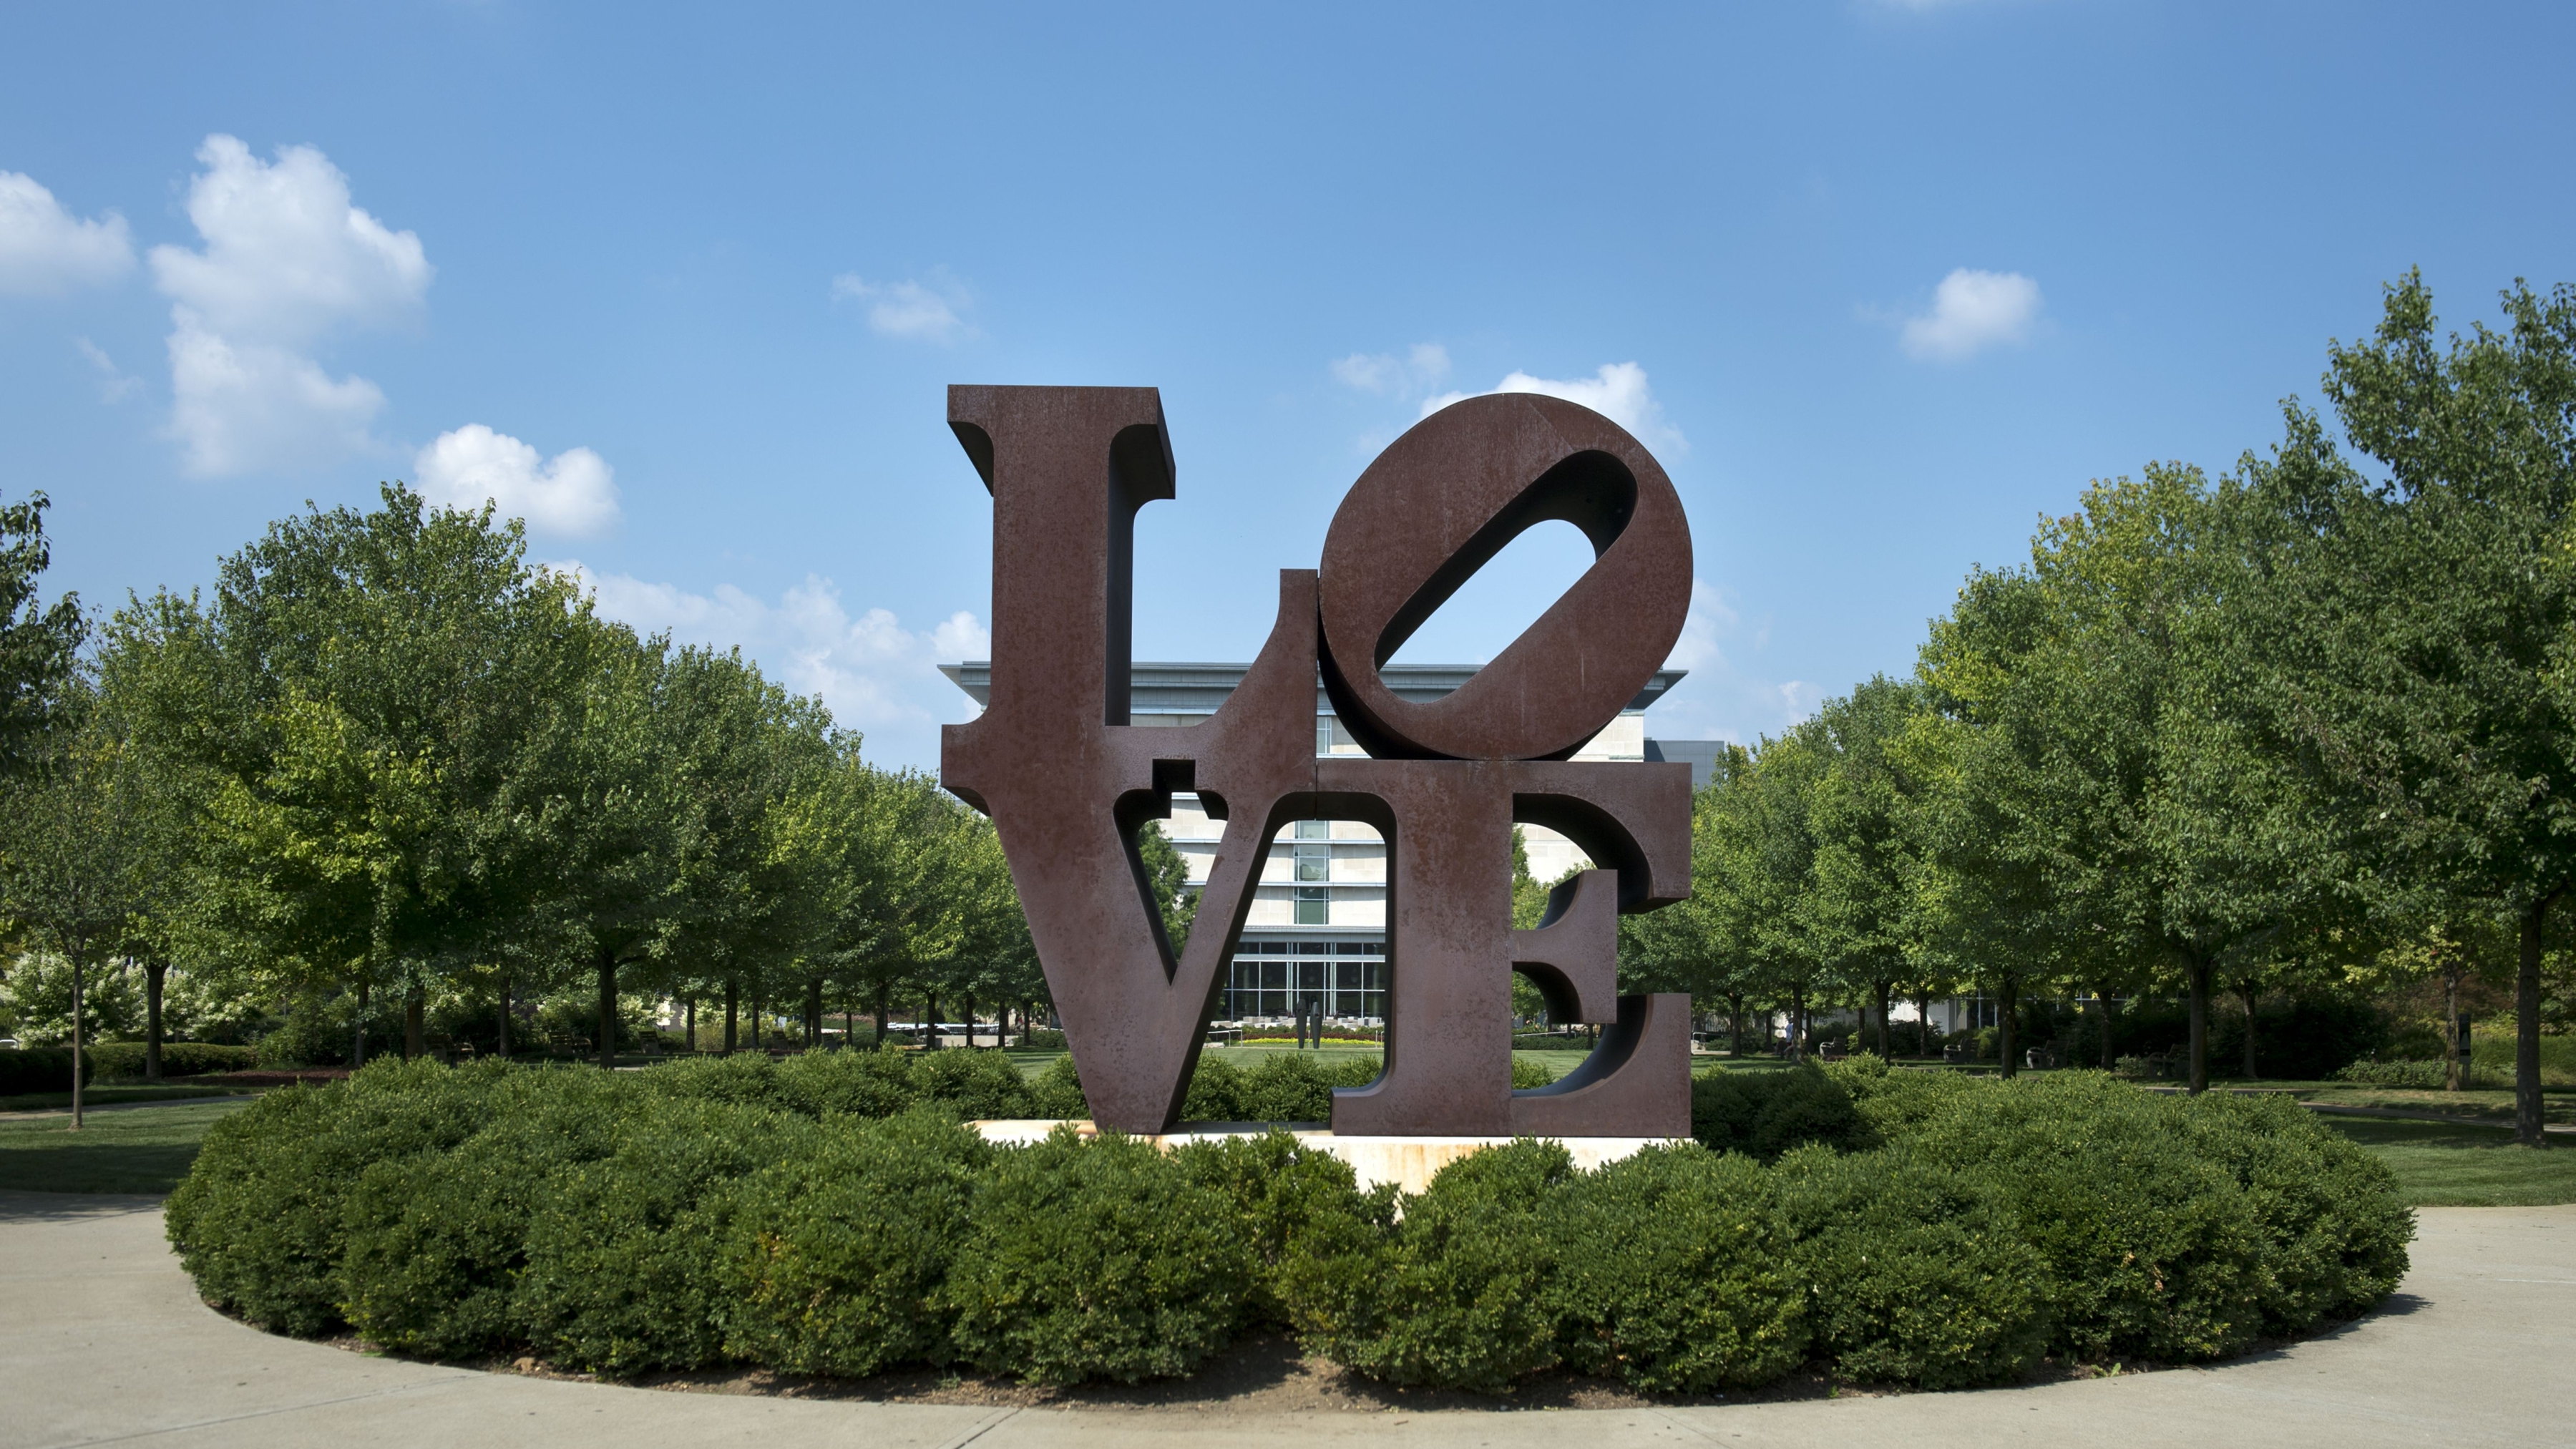 Installation view of&nbsp;LOVE,&nbsp;1970,&nbsp;Cor-Ten steel, 144 x 144 x 72 in. (365.8 x 365.8 x 182.9 cm) at the Indianapolis Museum of Art at Newfields, Indiana. Gift of the Friends of the IMA in memory of Henry F. DeBoest (1970) (IMA75.174)